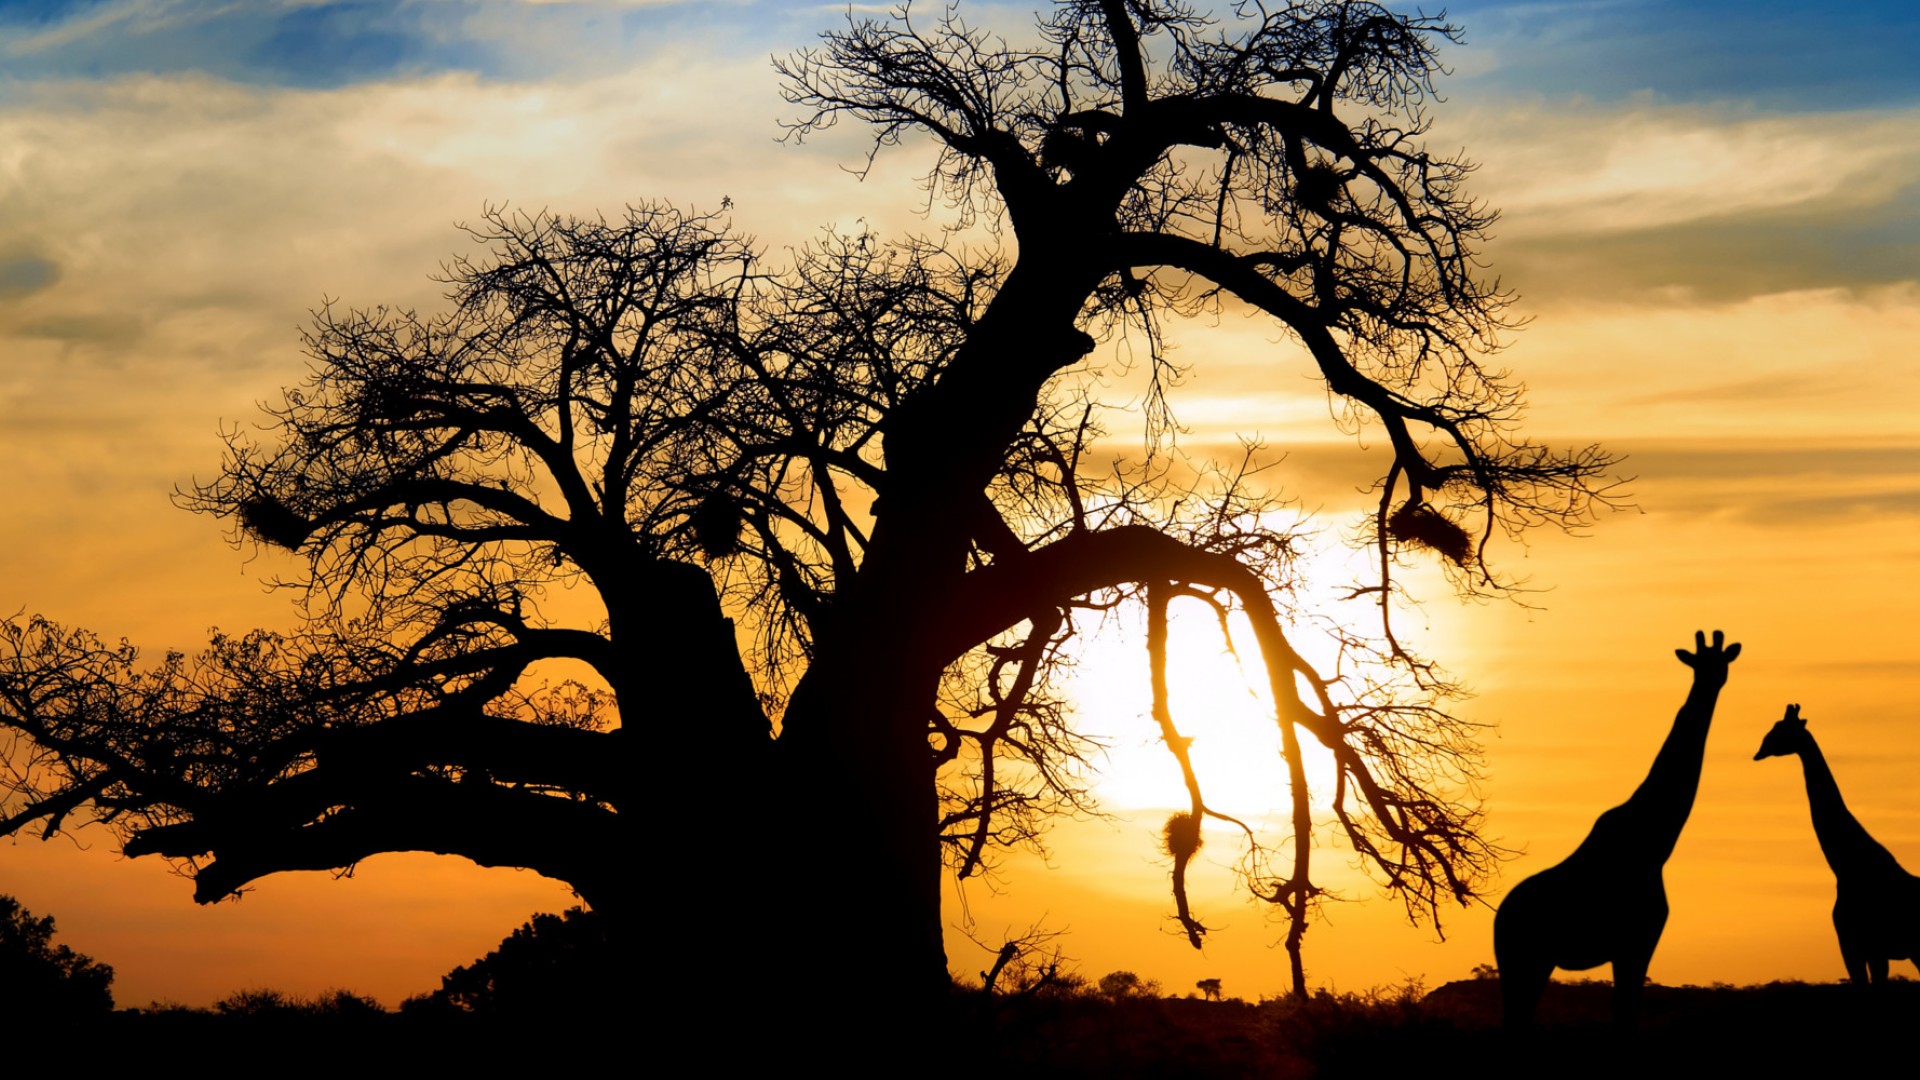 Sunset behind a large tree with may branches in South Africa